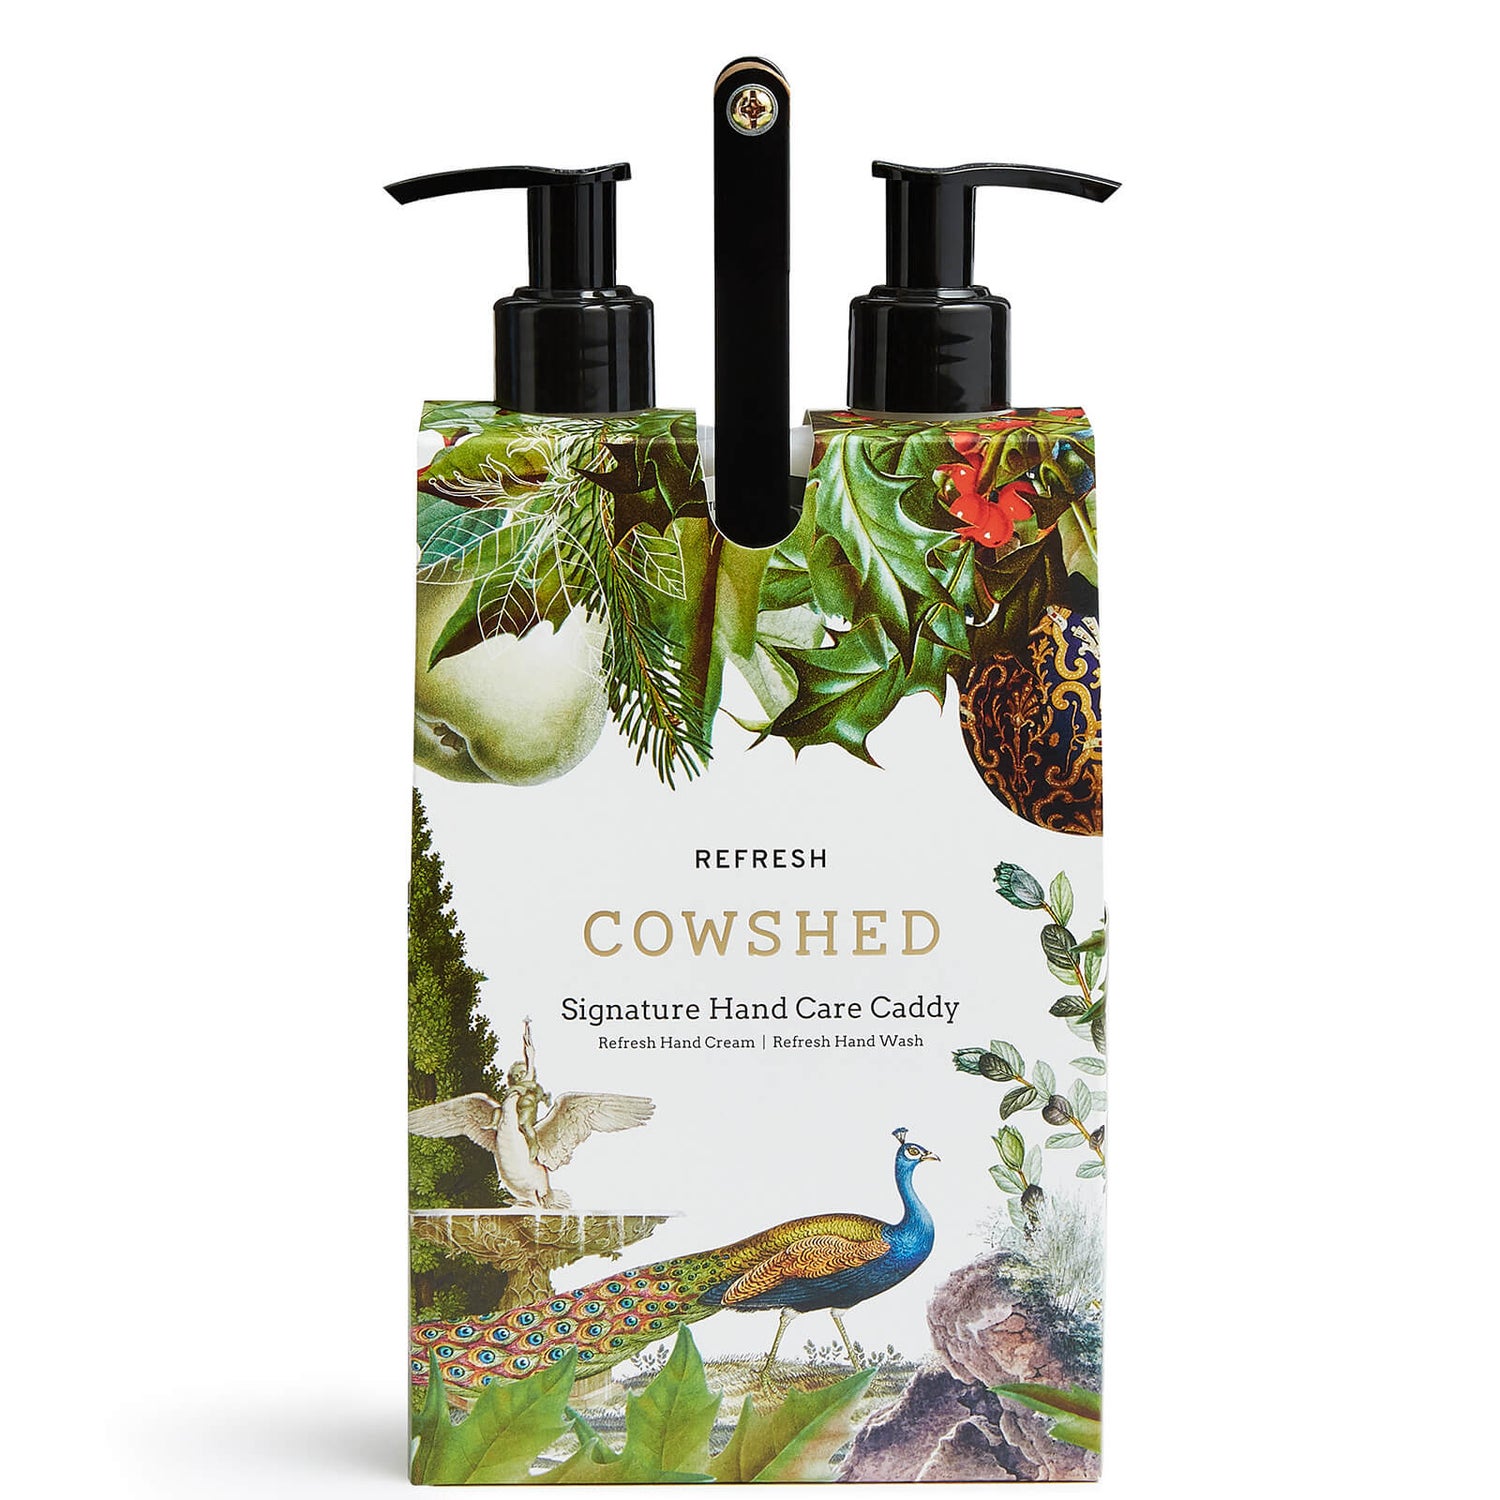 Cowshed Hand Care Caddy -käsihoitosetti